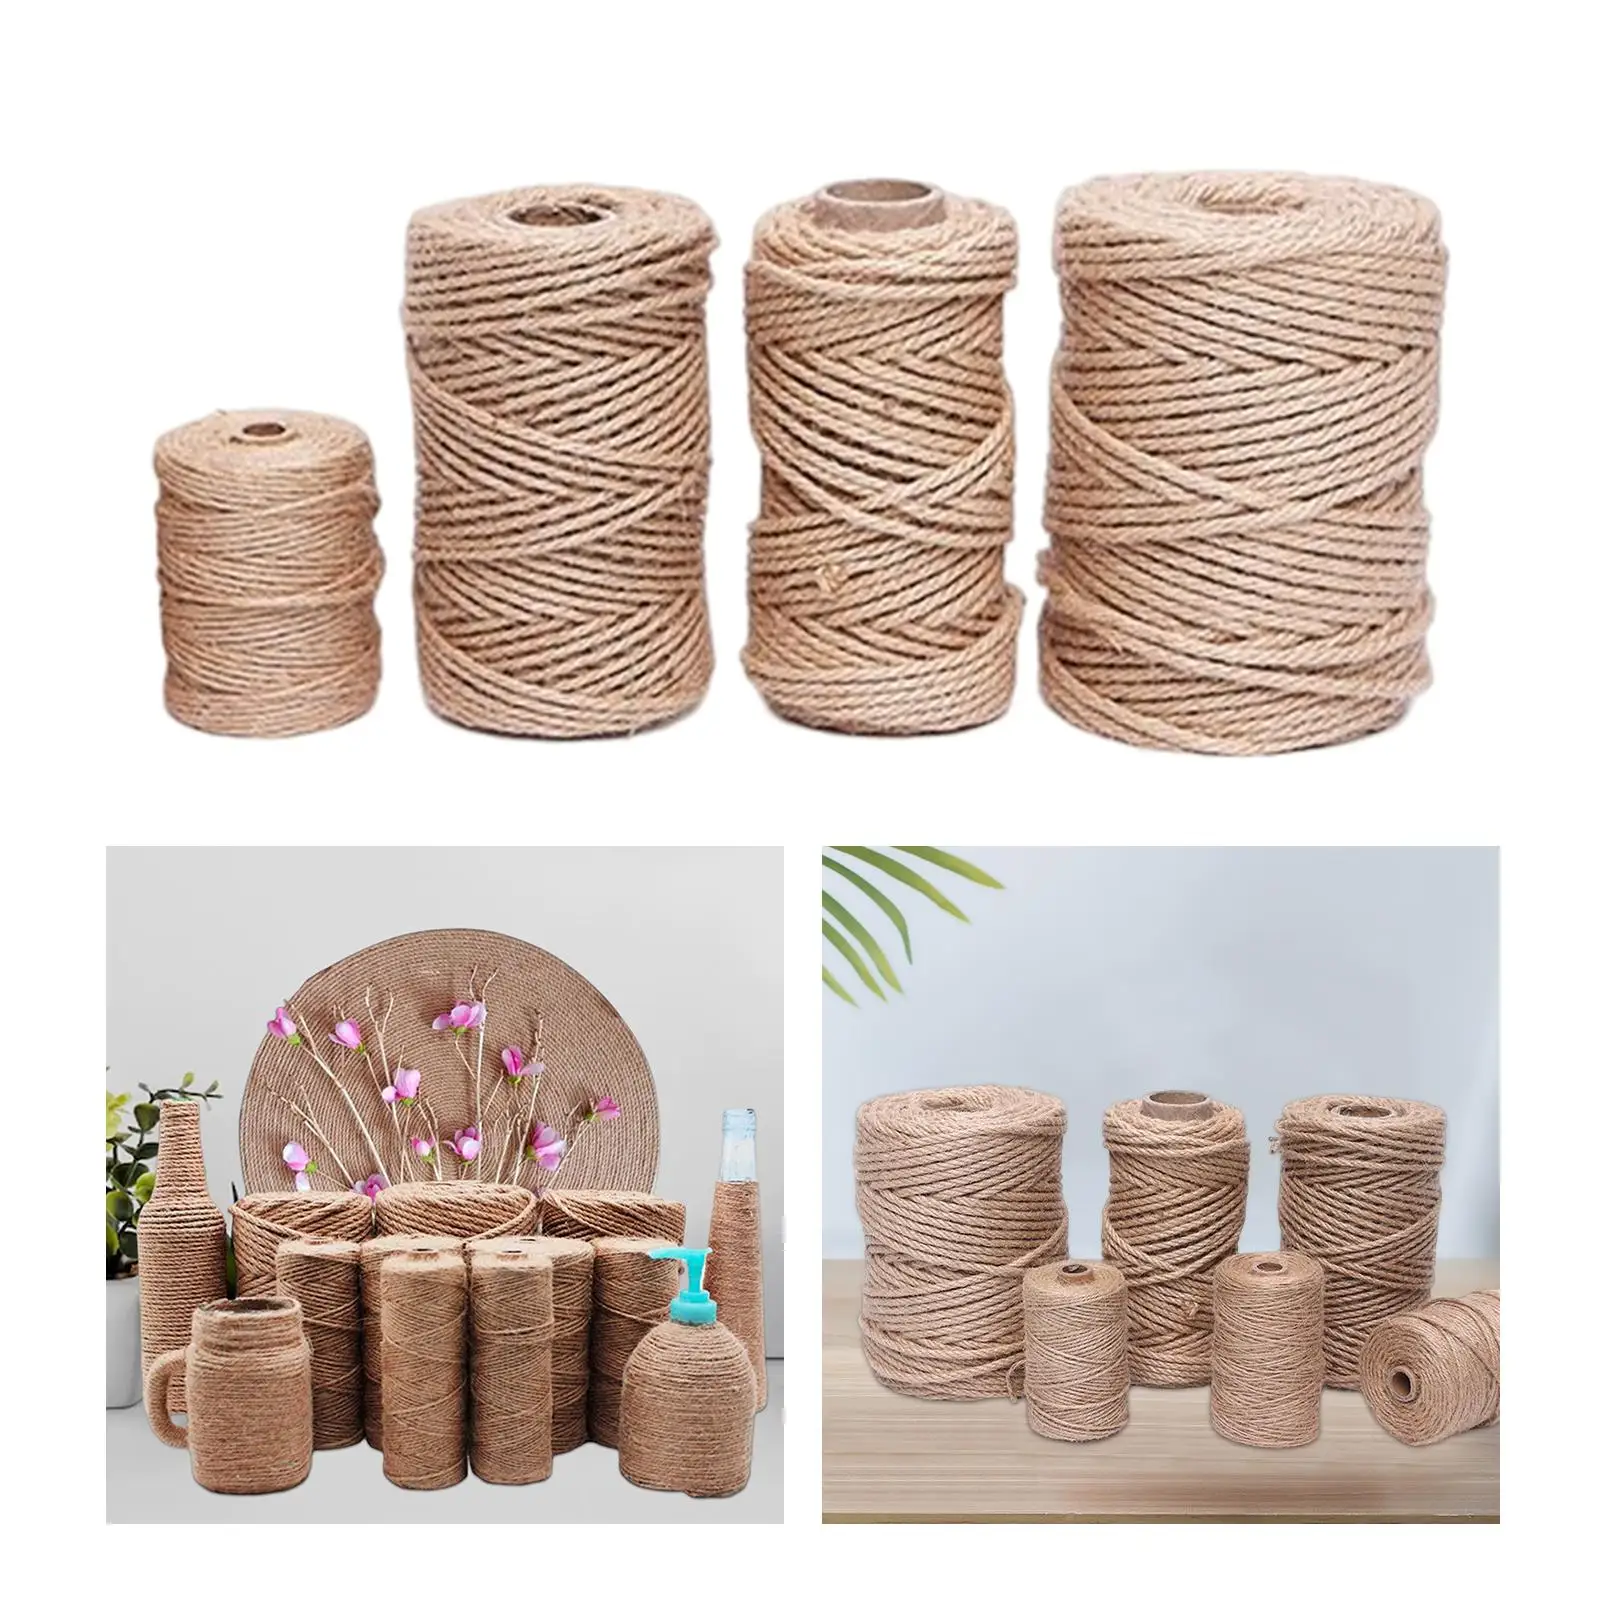 Jute Rope Decorative Replacement Sisal Rope for Cat Toys Scratching Post Home Garden Decor Cat Scratcher Rope Gift Packing